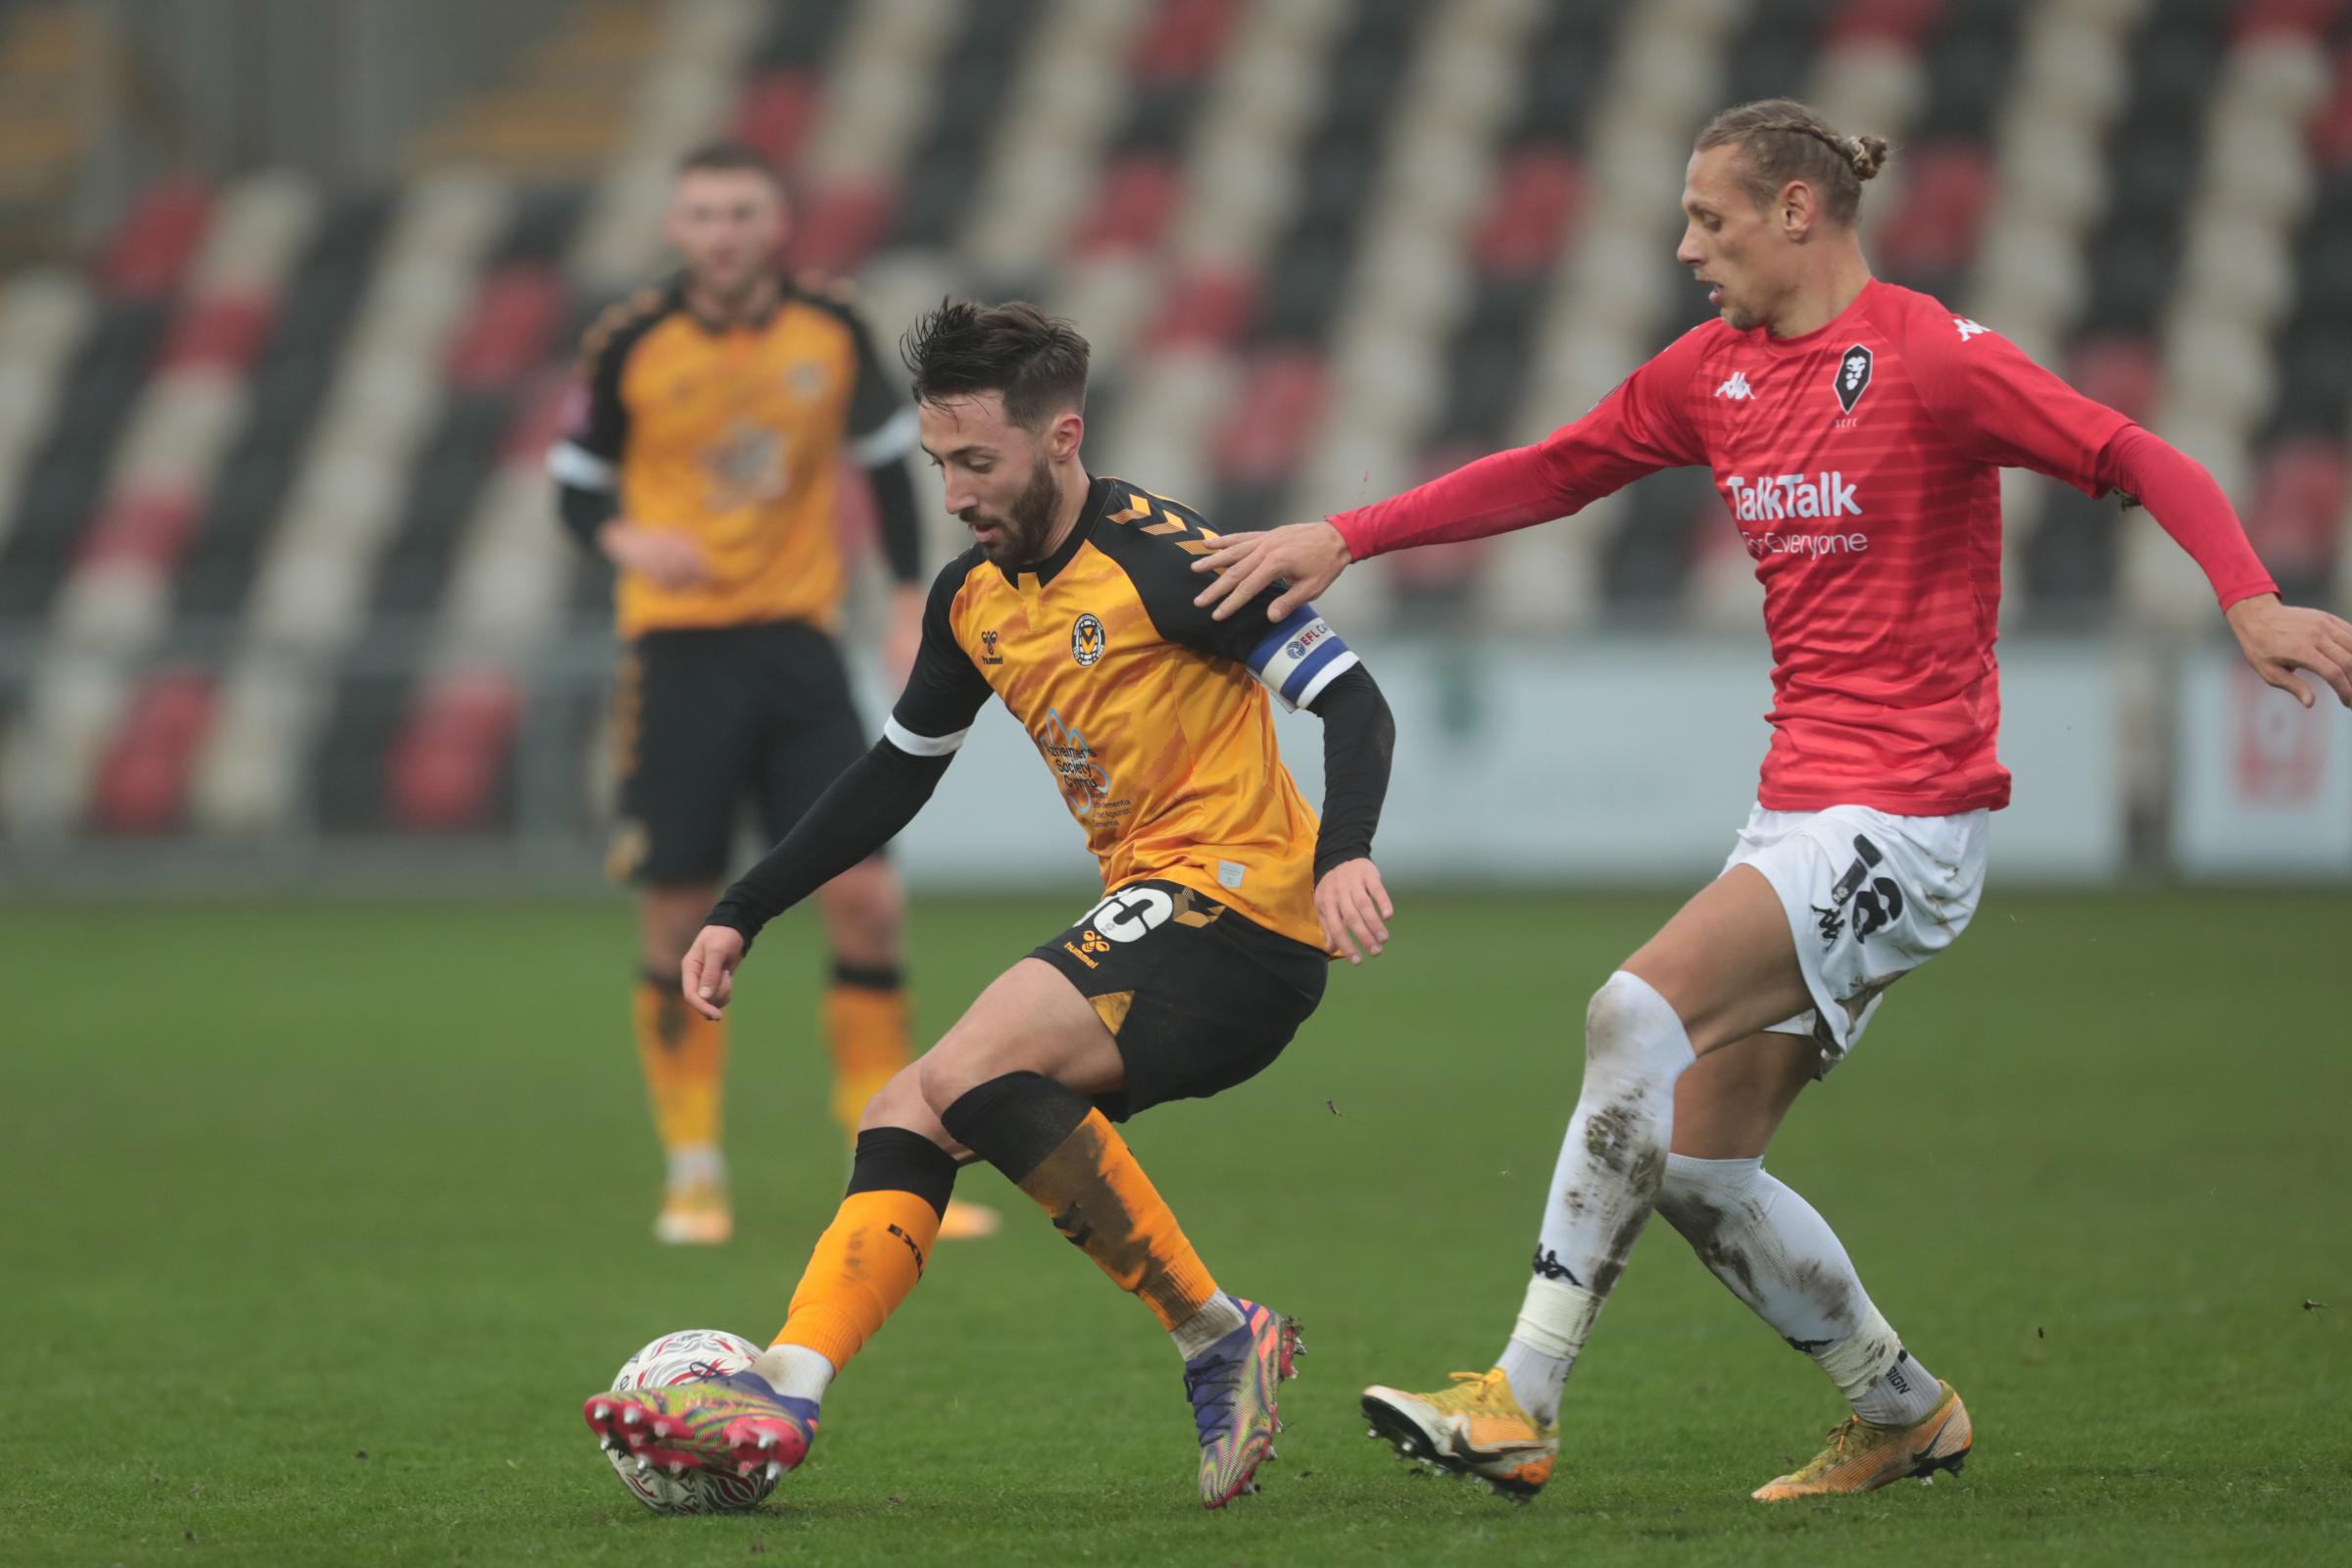 28.11.20 - Newport County v Salford City - FA Cup Second Round - Josh Sheehan of Newport County with Oscar Threlkeld of Salford City ...